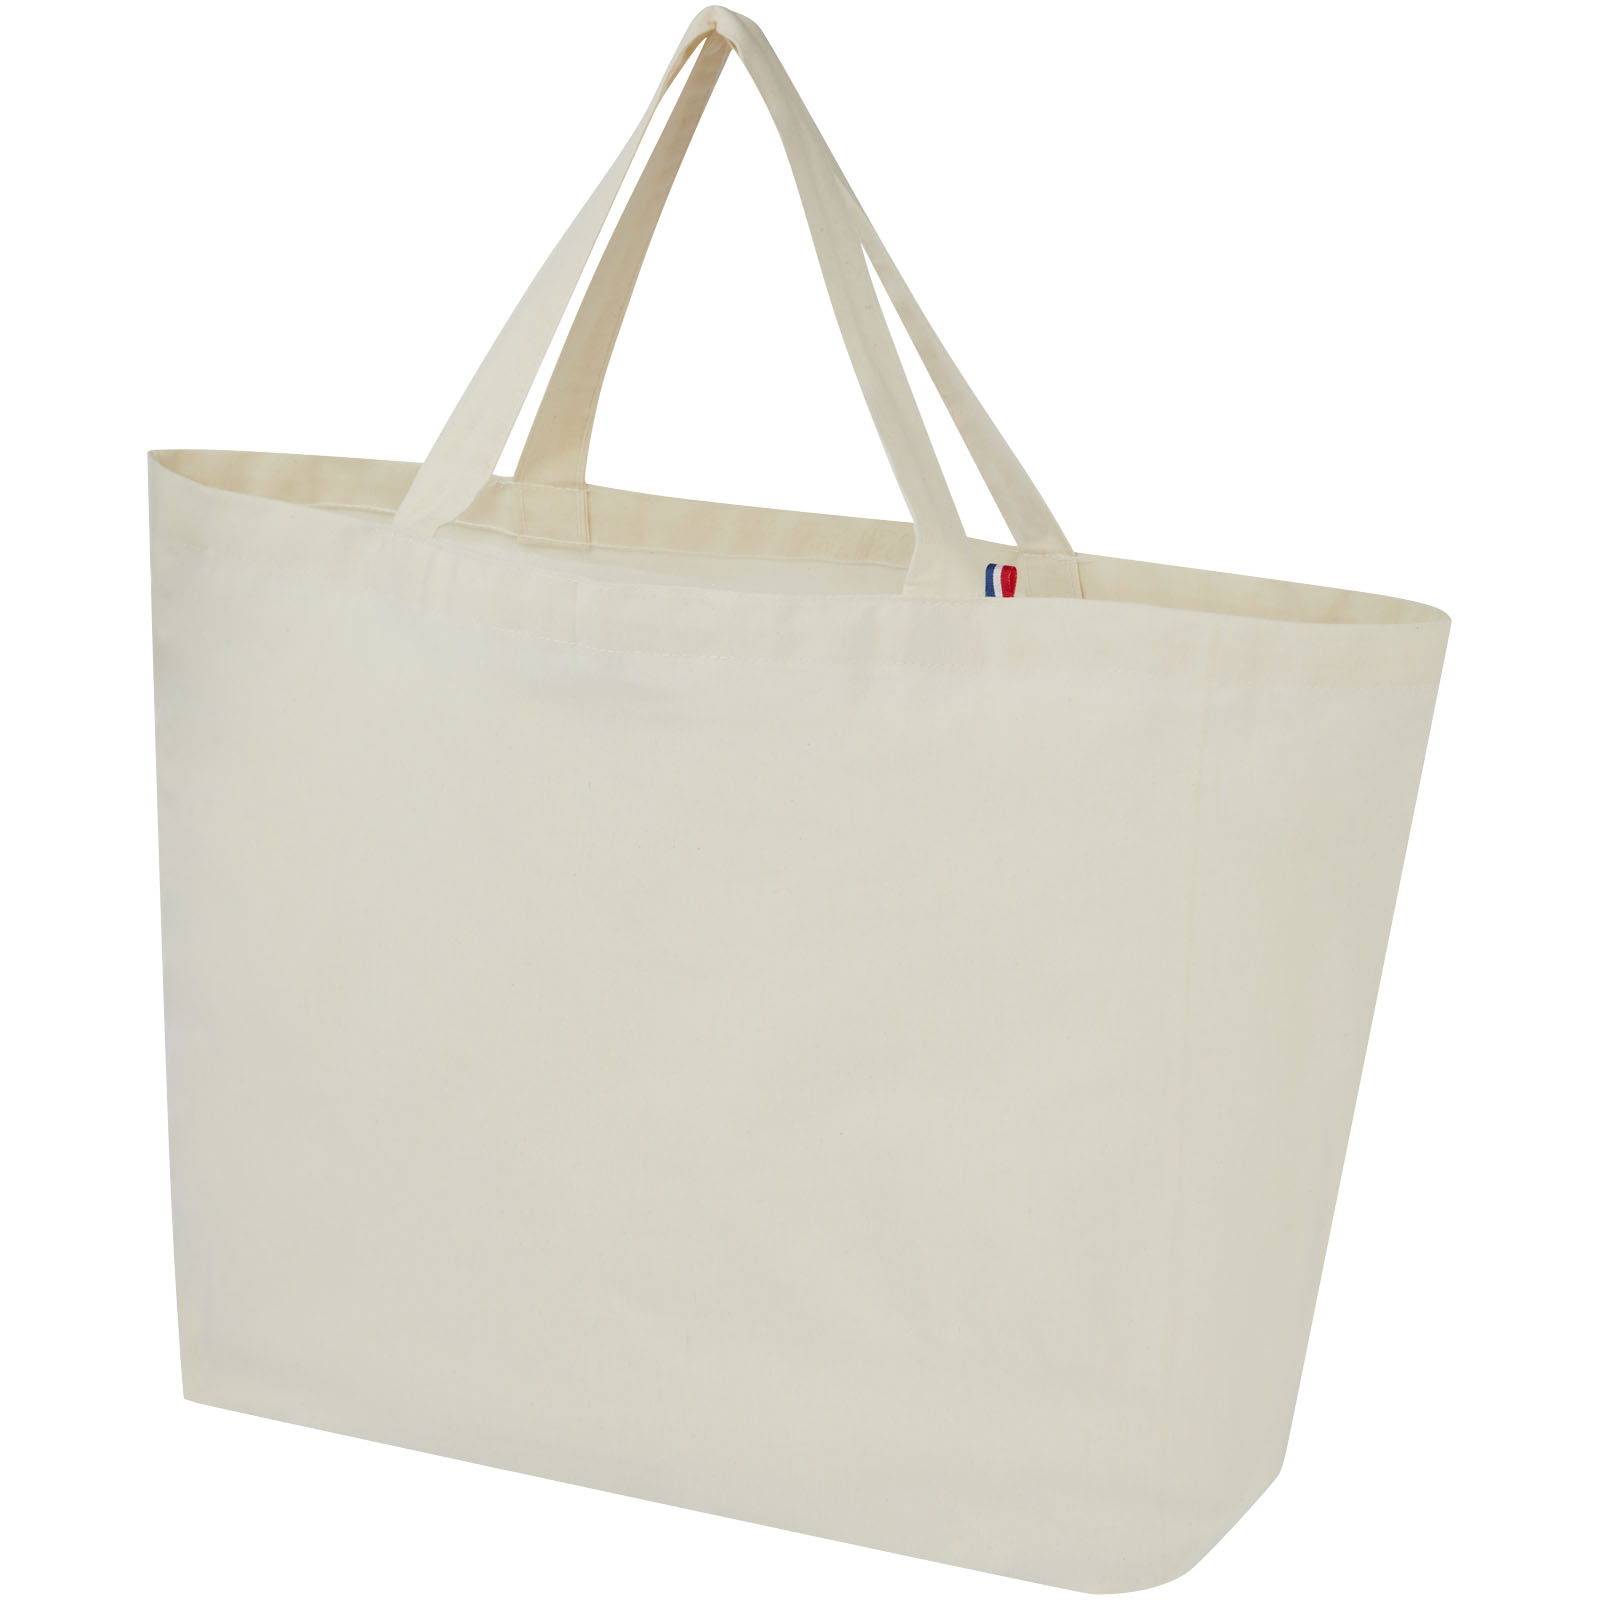 Bags - Cannes 200 g/m2 recycled shopper tote bag 10L